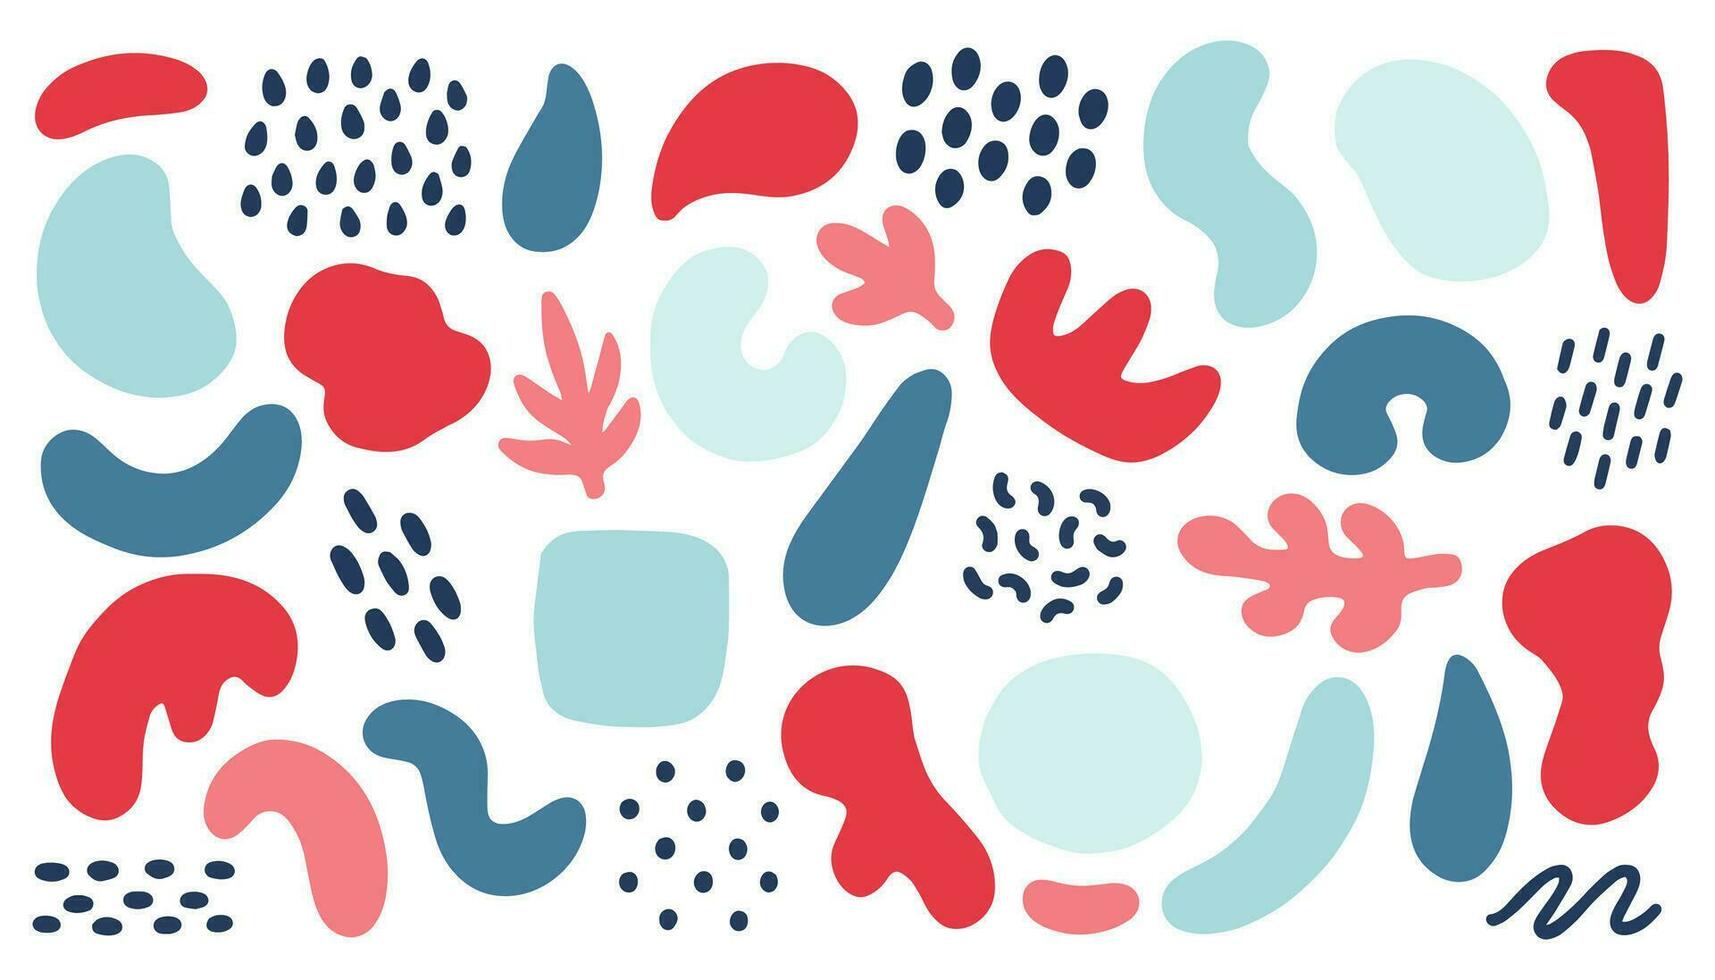 Big set of colorful hand painted various shapes, curls, forms, brush strokes and doodle objects. Abstract modern minimalist trendy vector illustration.